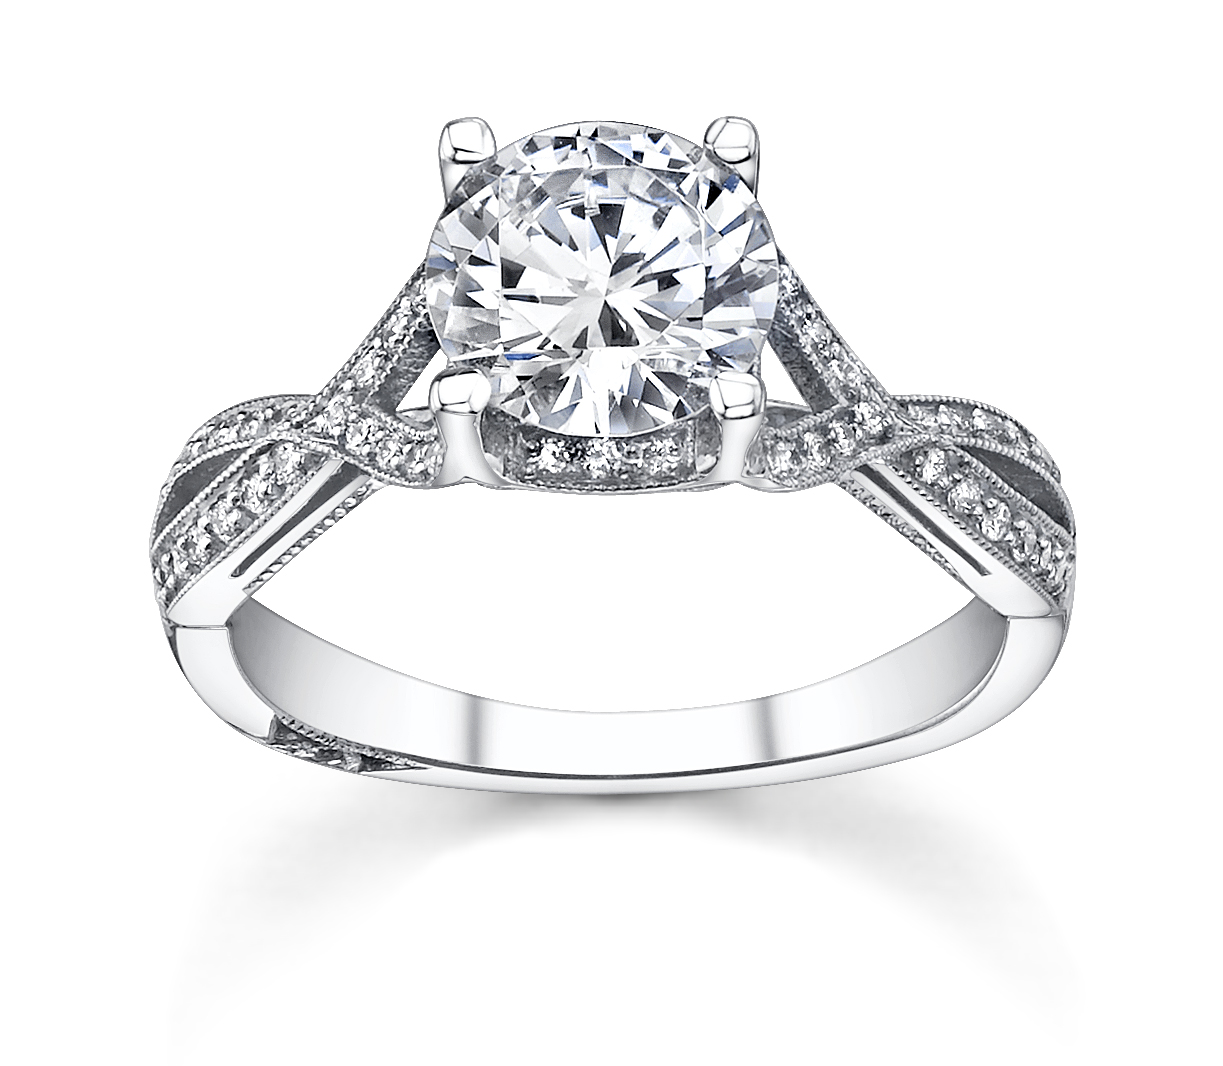 Expensive and trendy â€“ designer engagement rings